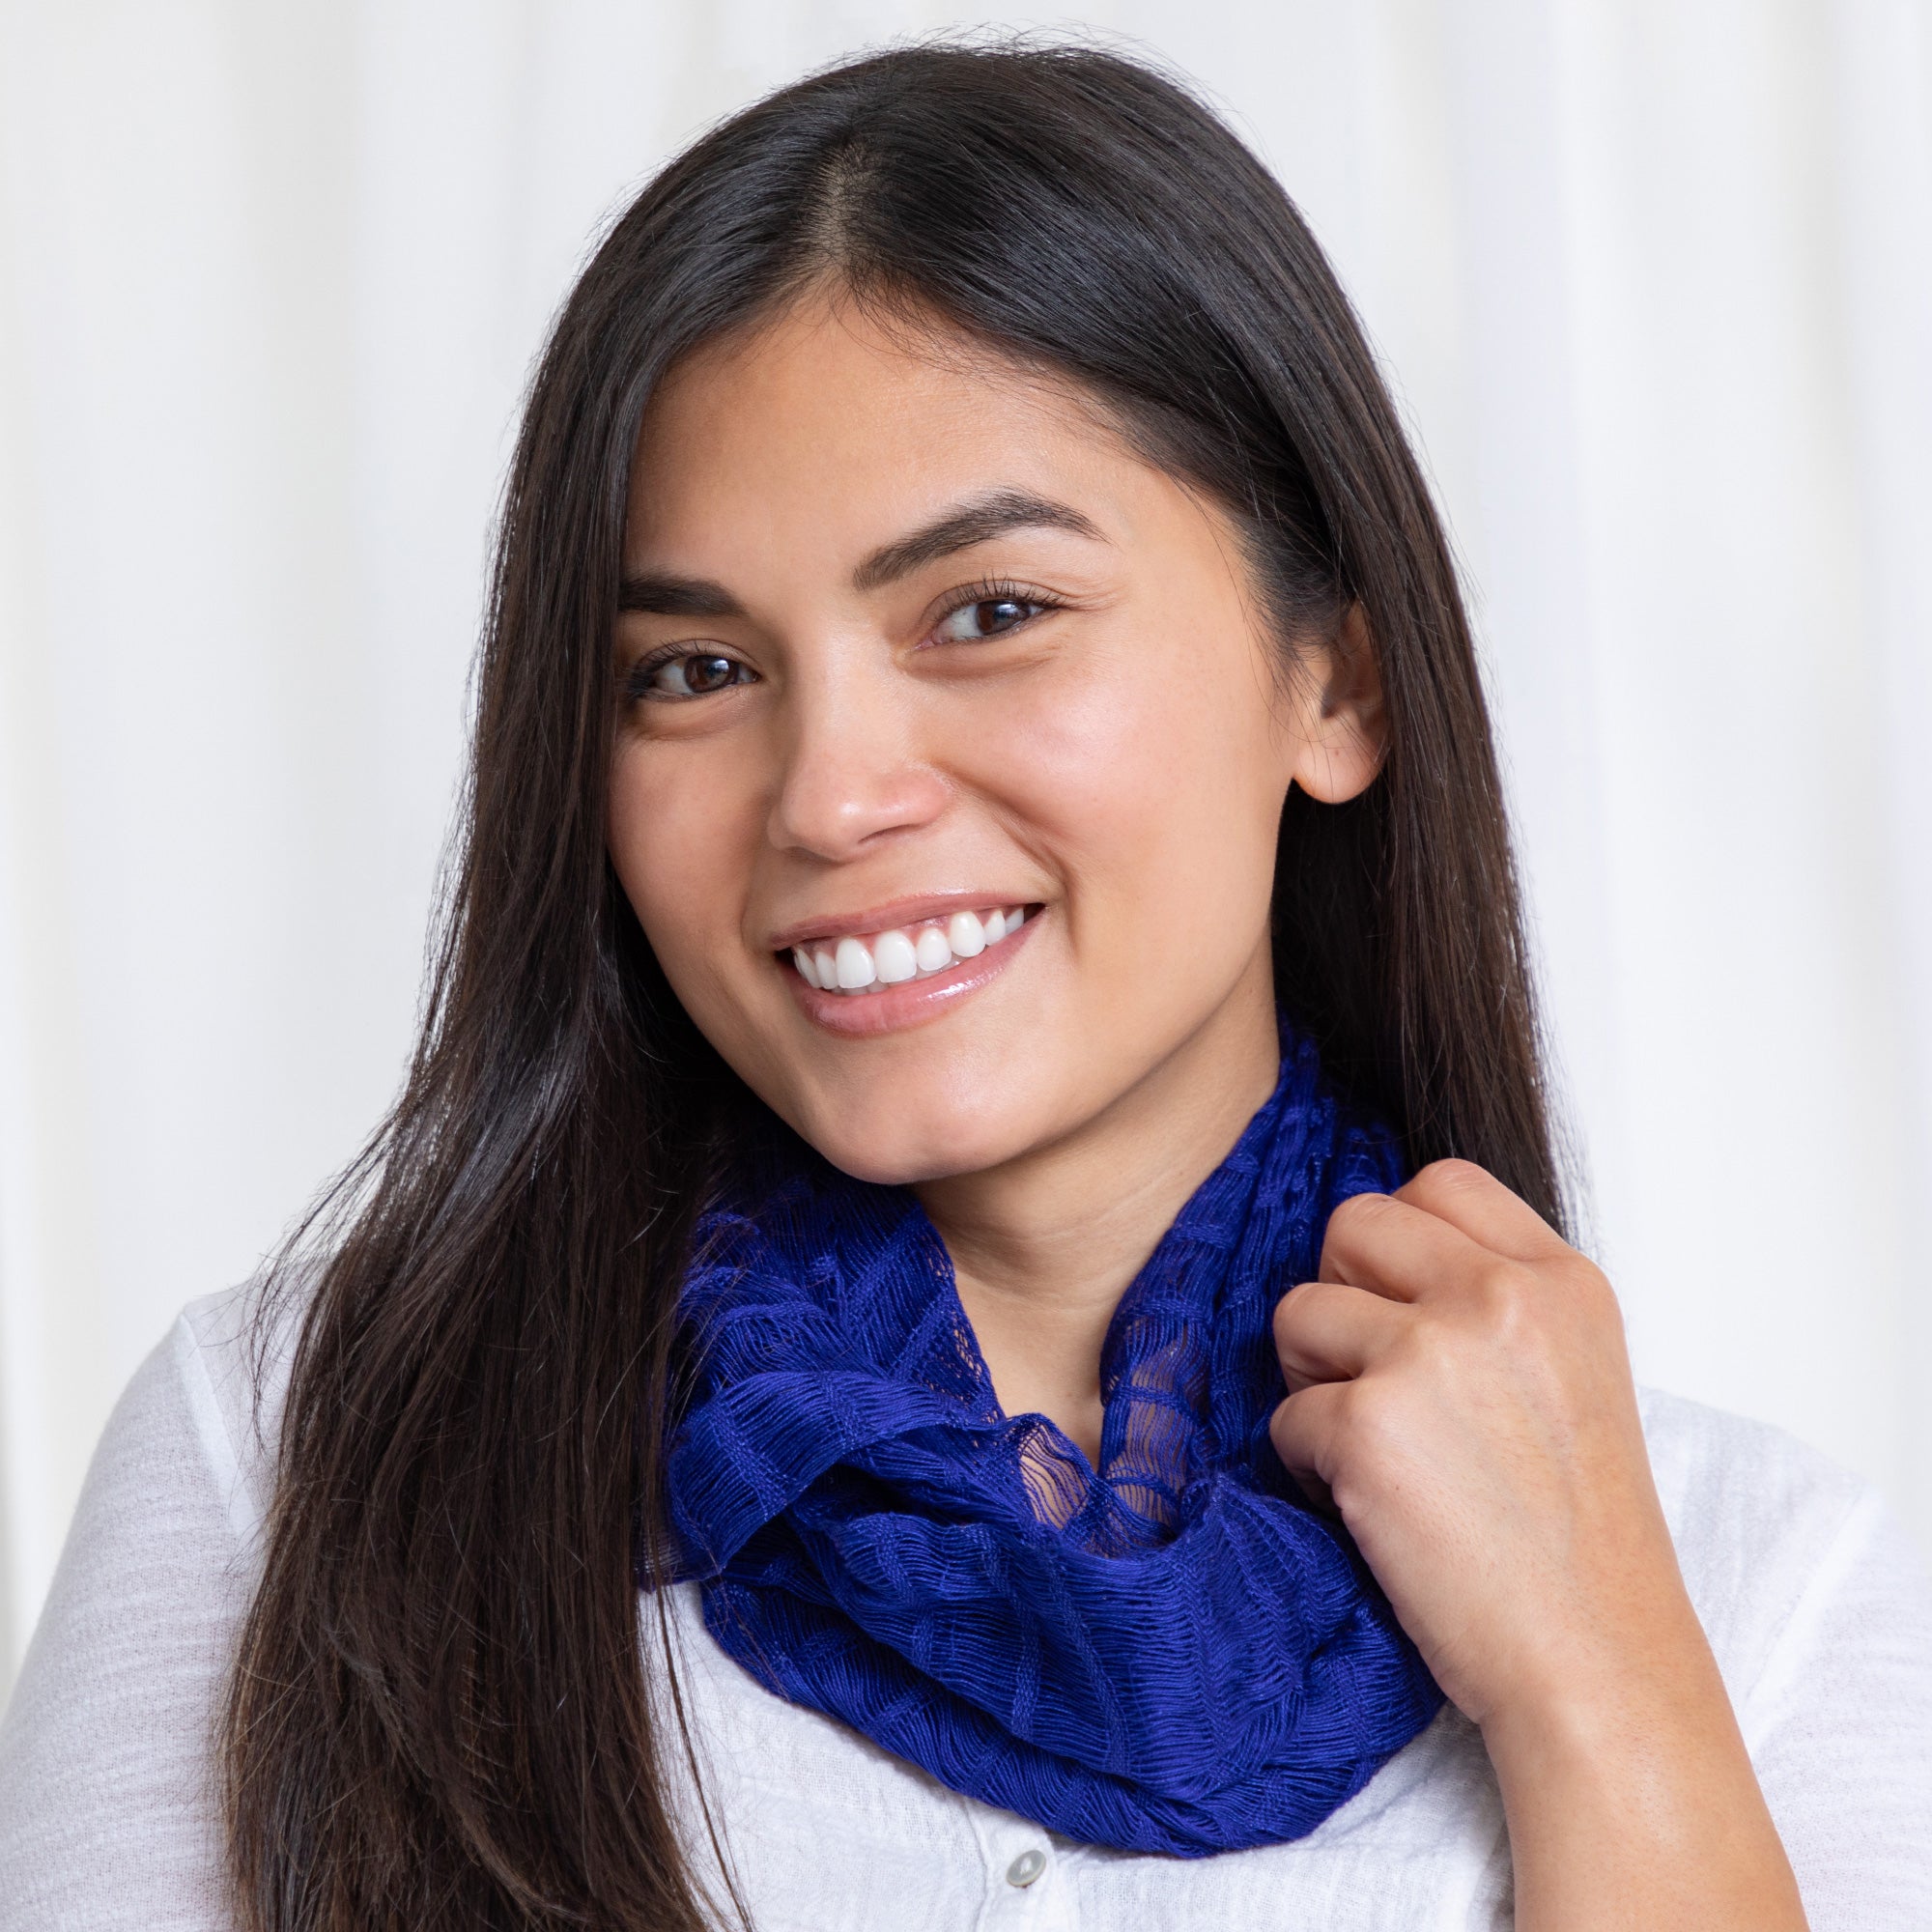 Waves Of Color Infinity Scarf - Blue